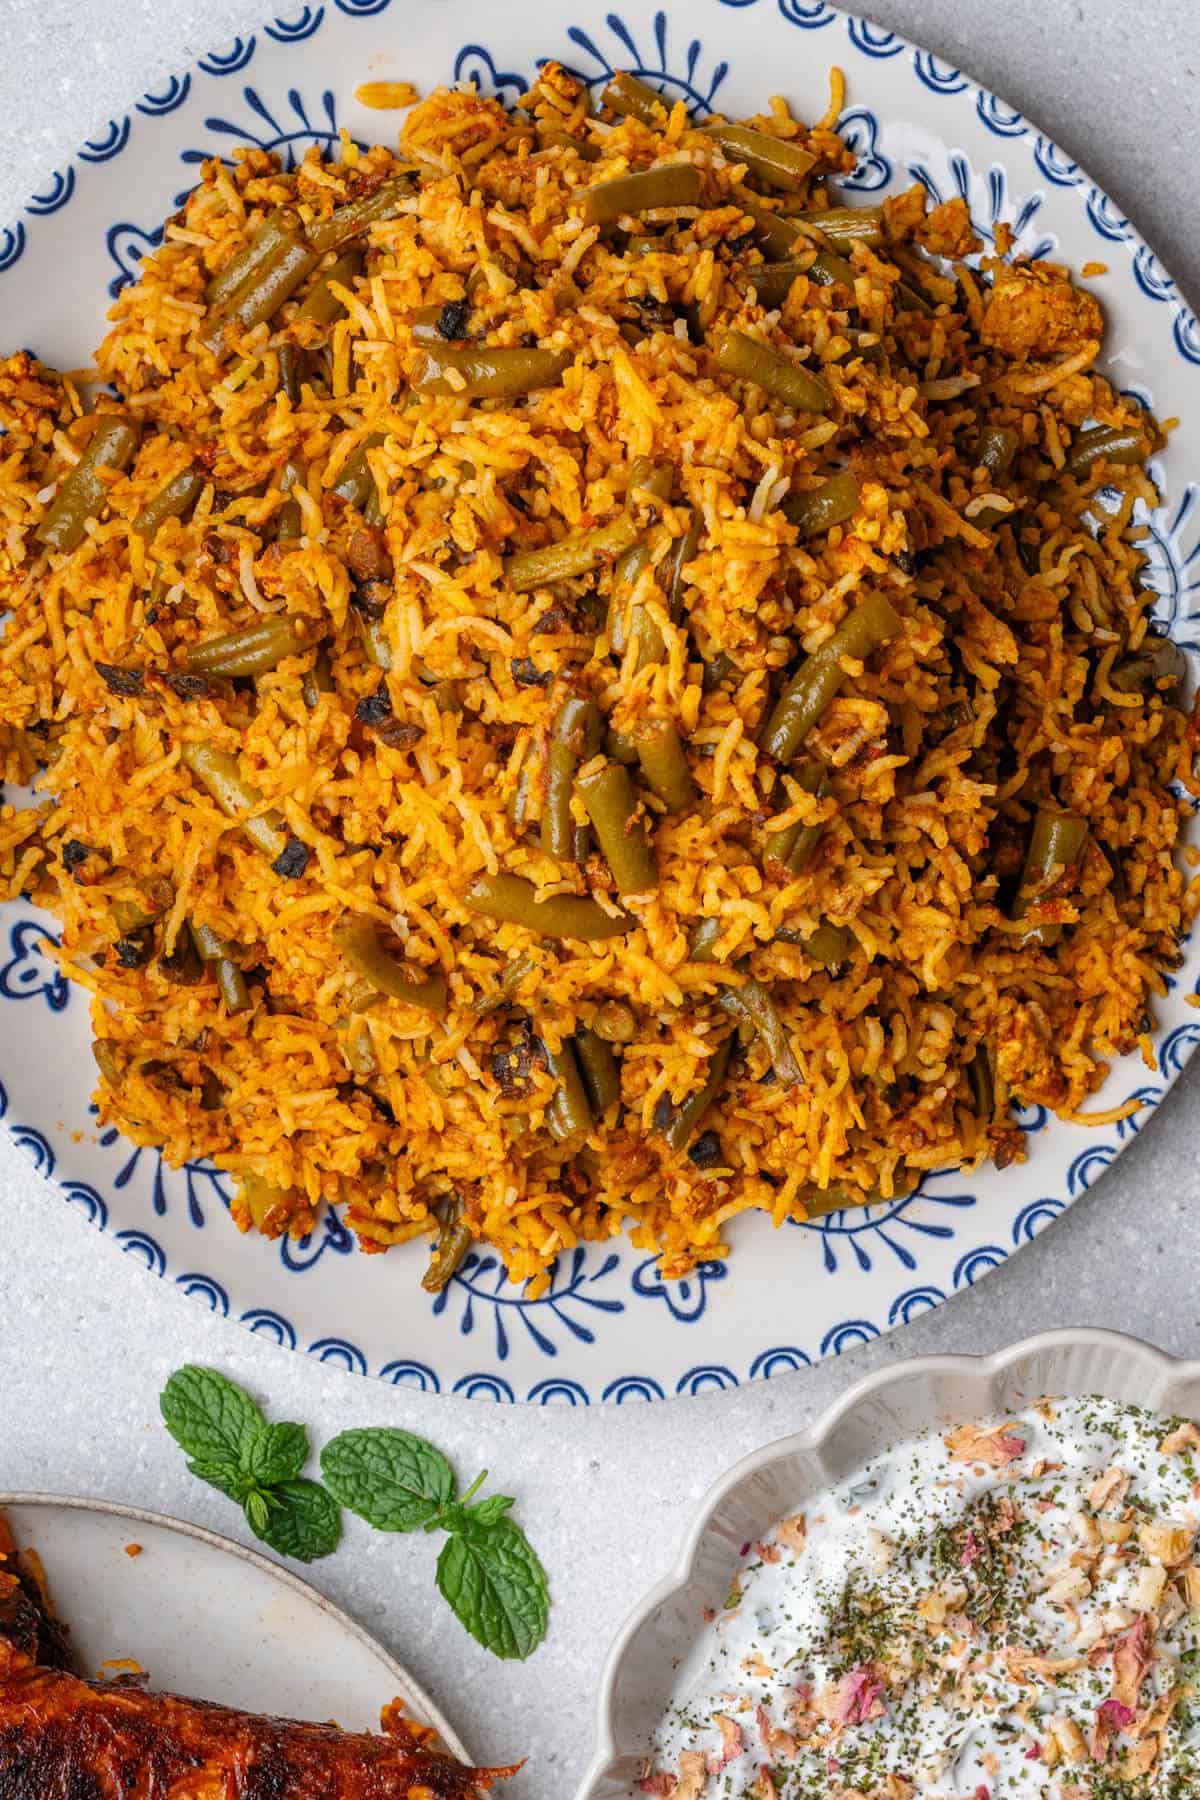 Lubia Polo (Persian Green Bean Rice) served with a yoghurt and cucumber dip on the side